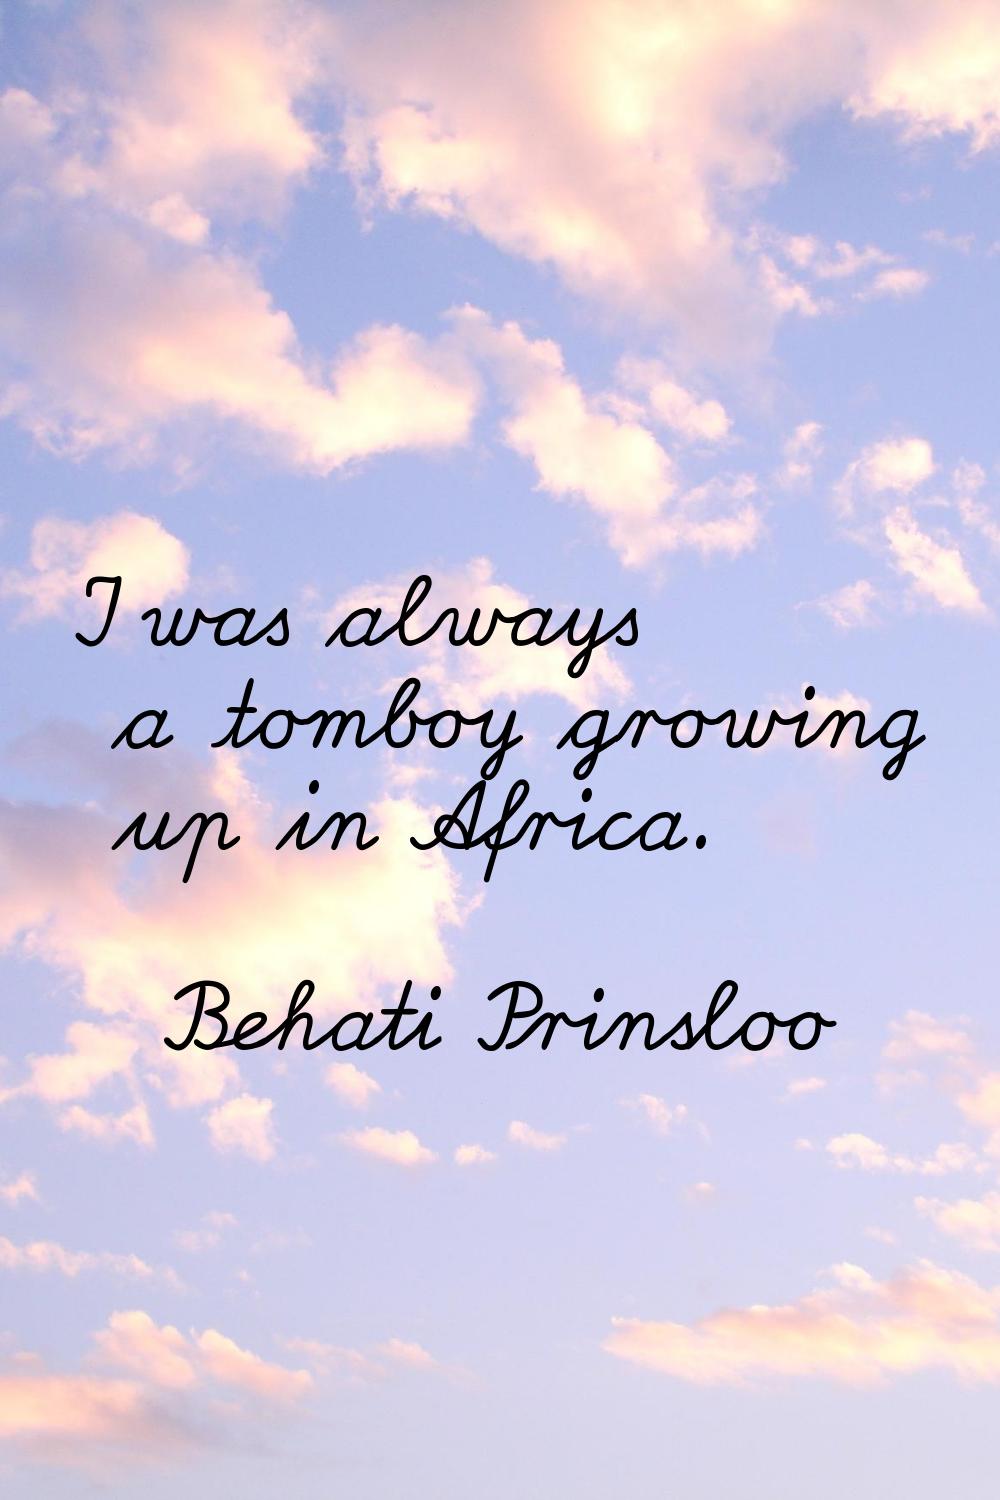 I was always a tomboy growing up in Africa.